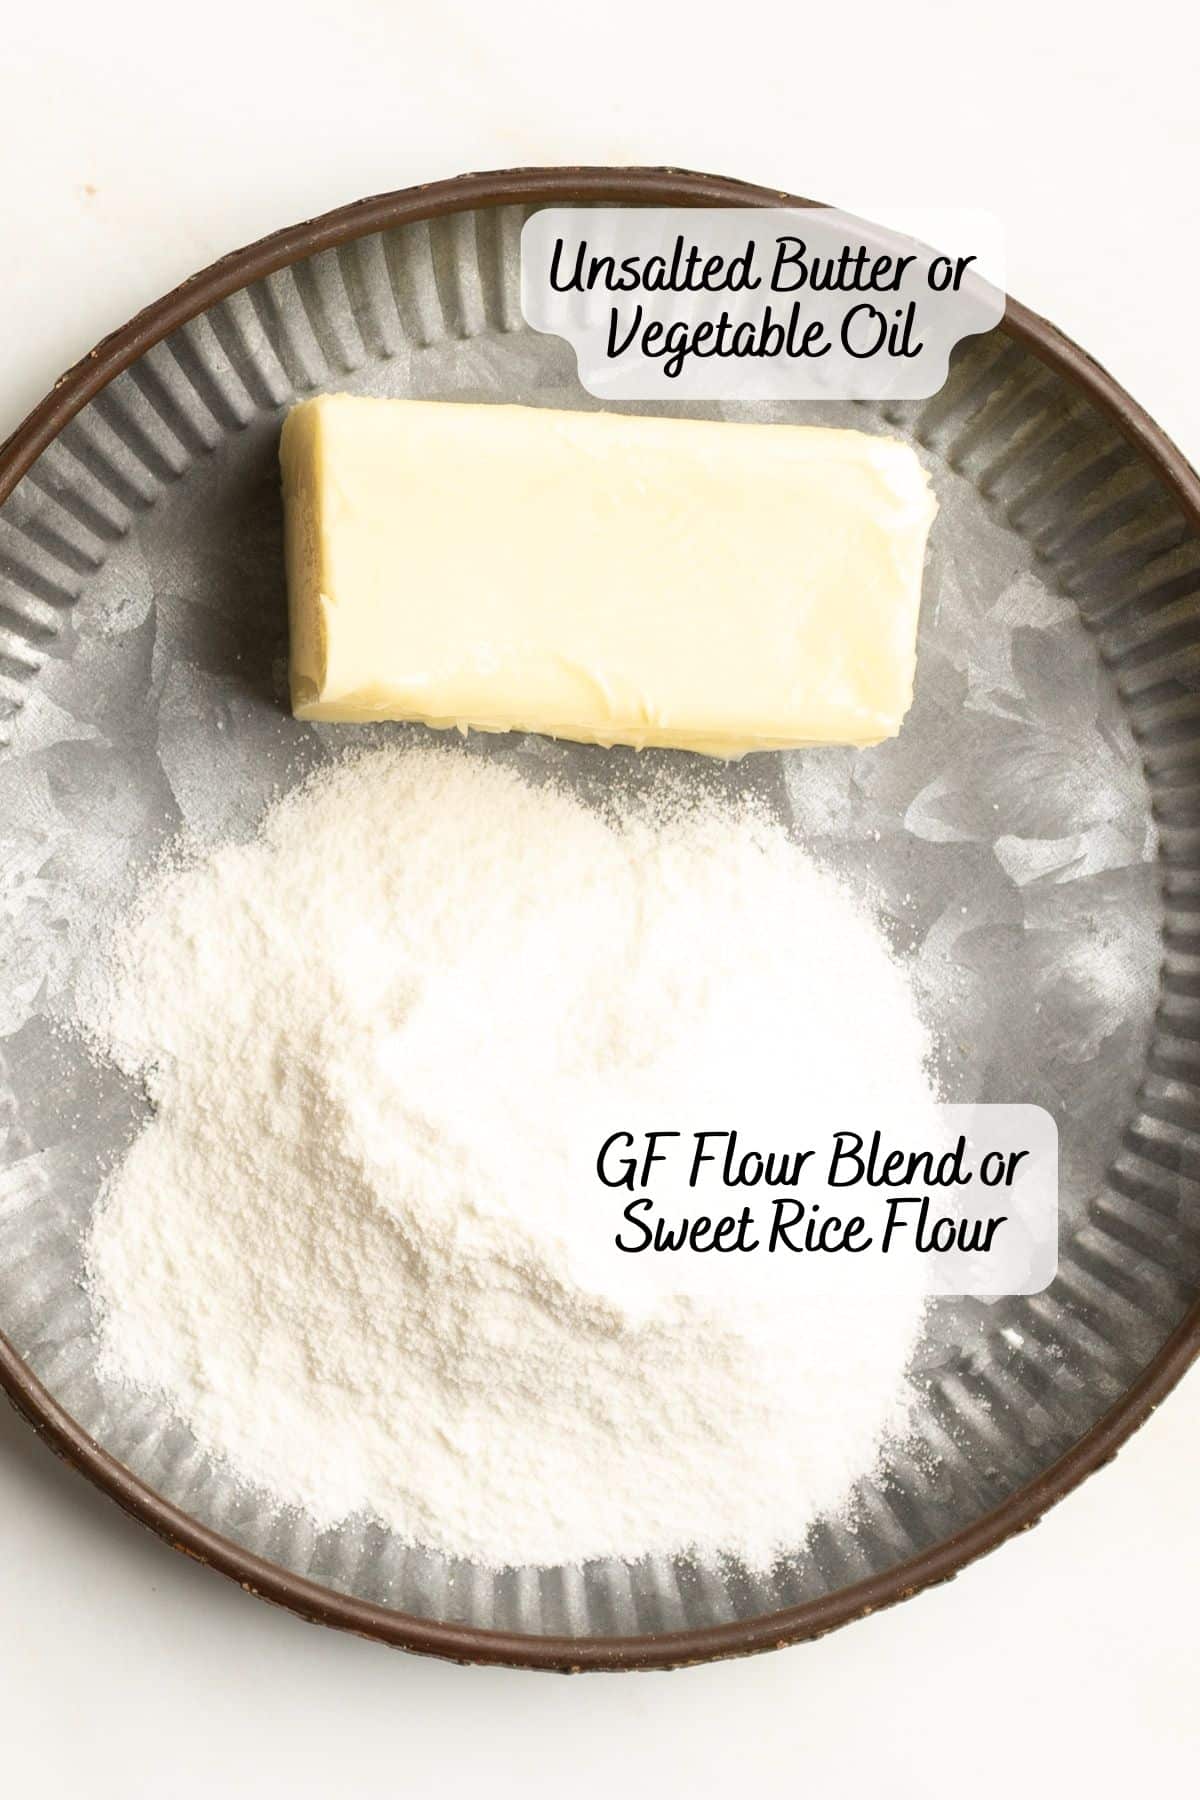 Butter and gluten free flour on a plate.